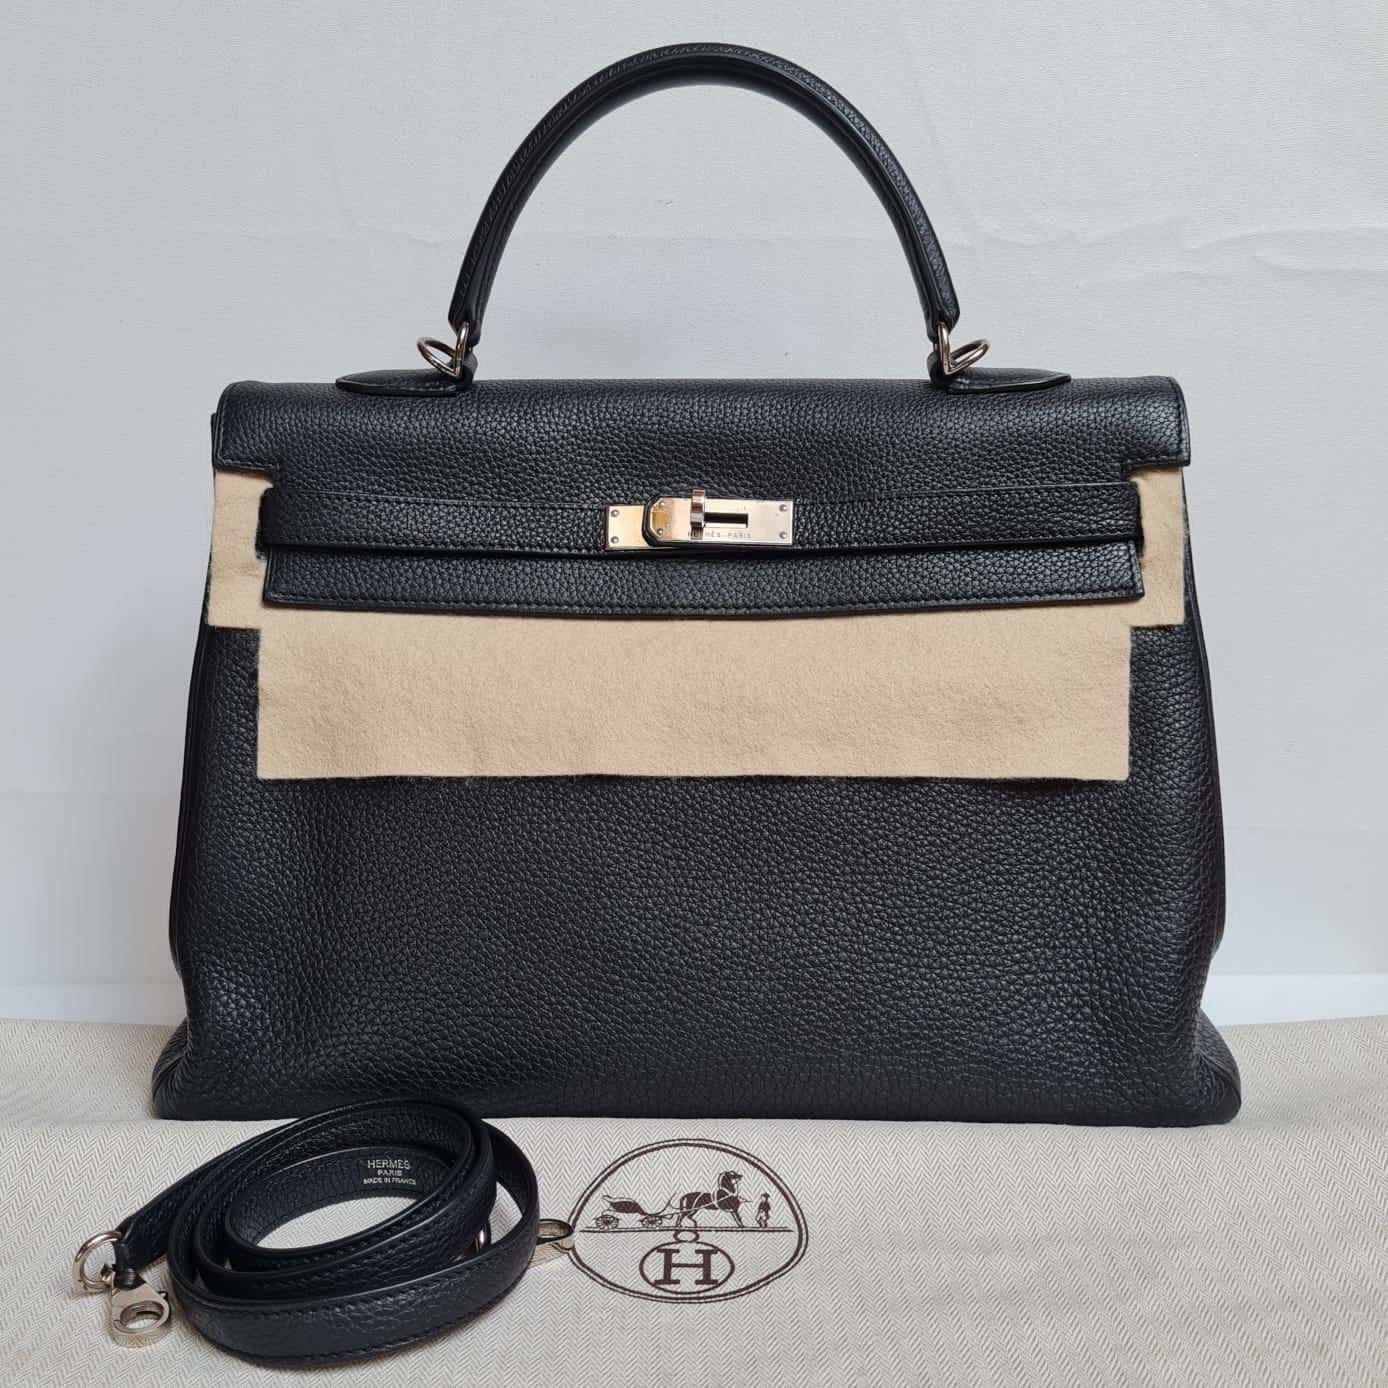 Classic black togo leather kelly 35 bag with palladium hardware. Beautiful statement piece for everywhere wear. Some touch ups on the handle pipeline has been professionally done. Stamp square N. Comes with its strap and dust bag. Missing its